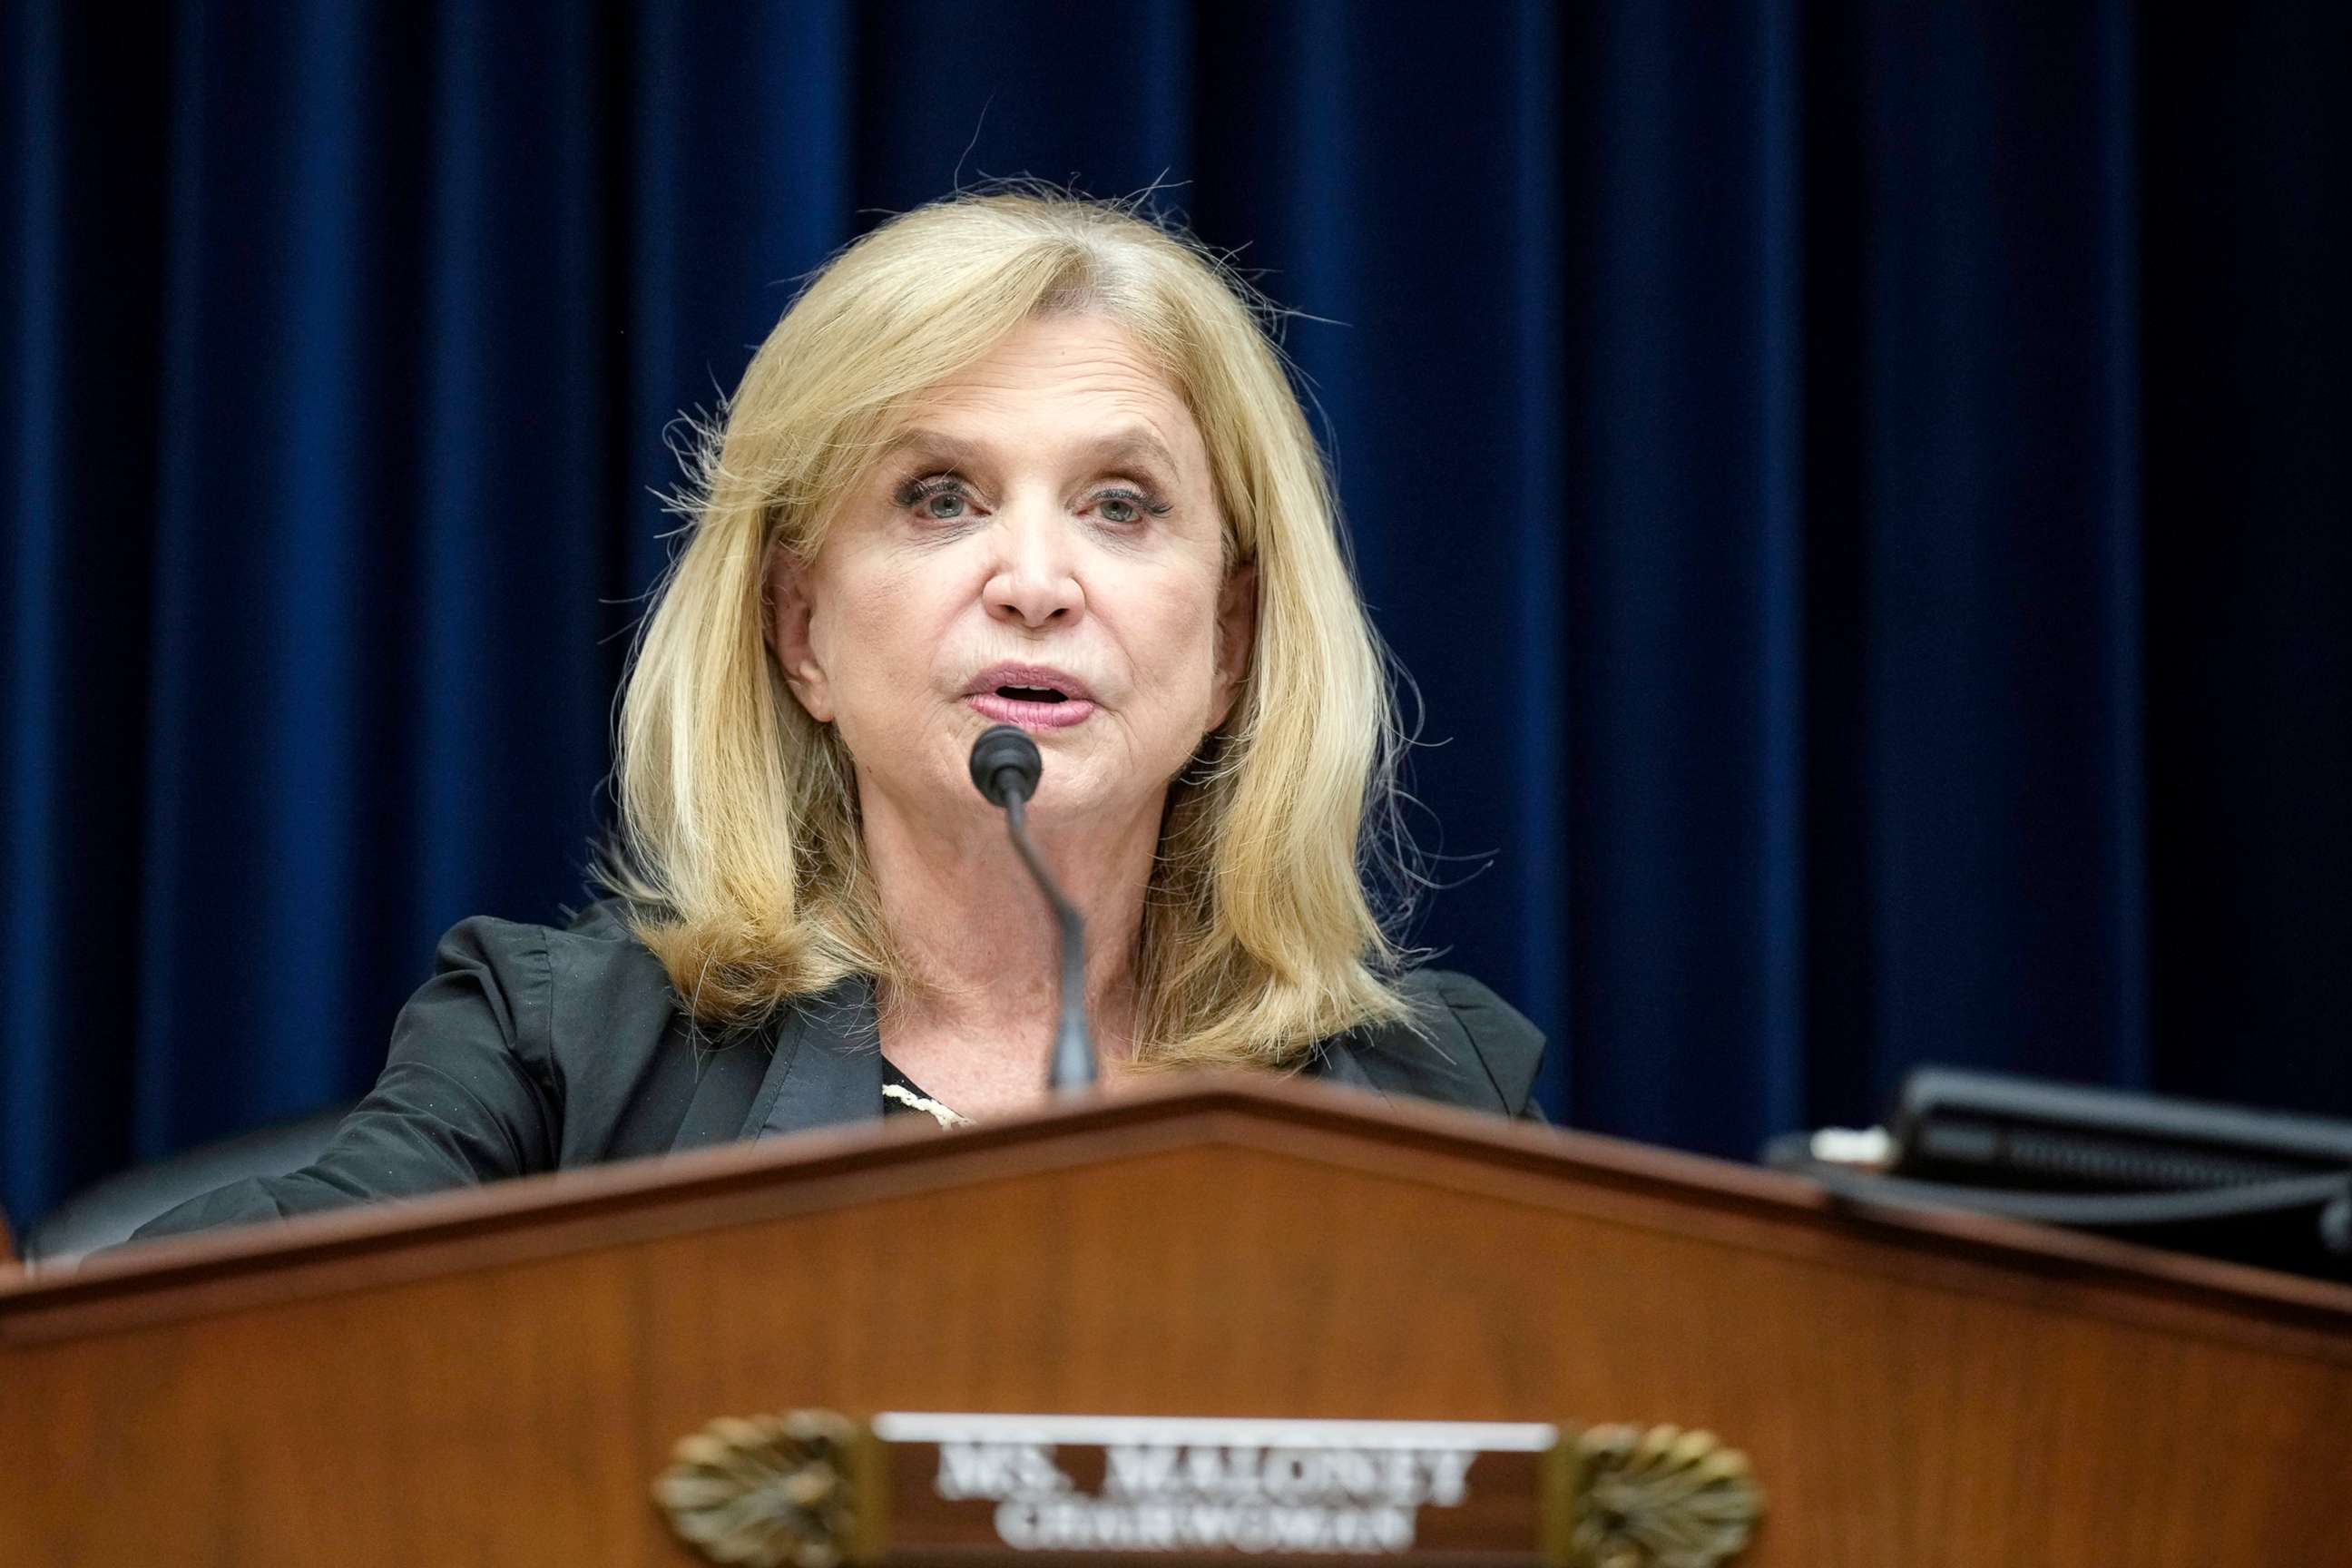 PHOTO: Committee chairwoman Rep. Carolyn Maloney speaks during a House Oversight Committee hearing titled Examining the Practices and Profits of Gun Manufacturers in the Rayburn House Office Building on Capitol Hill, July 27, 2022.